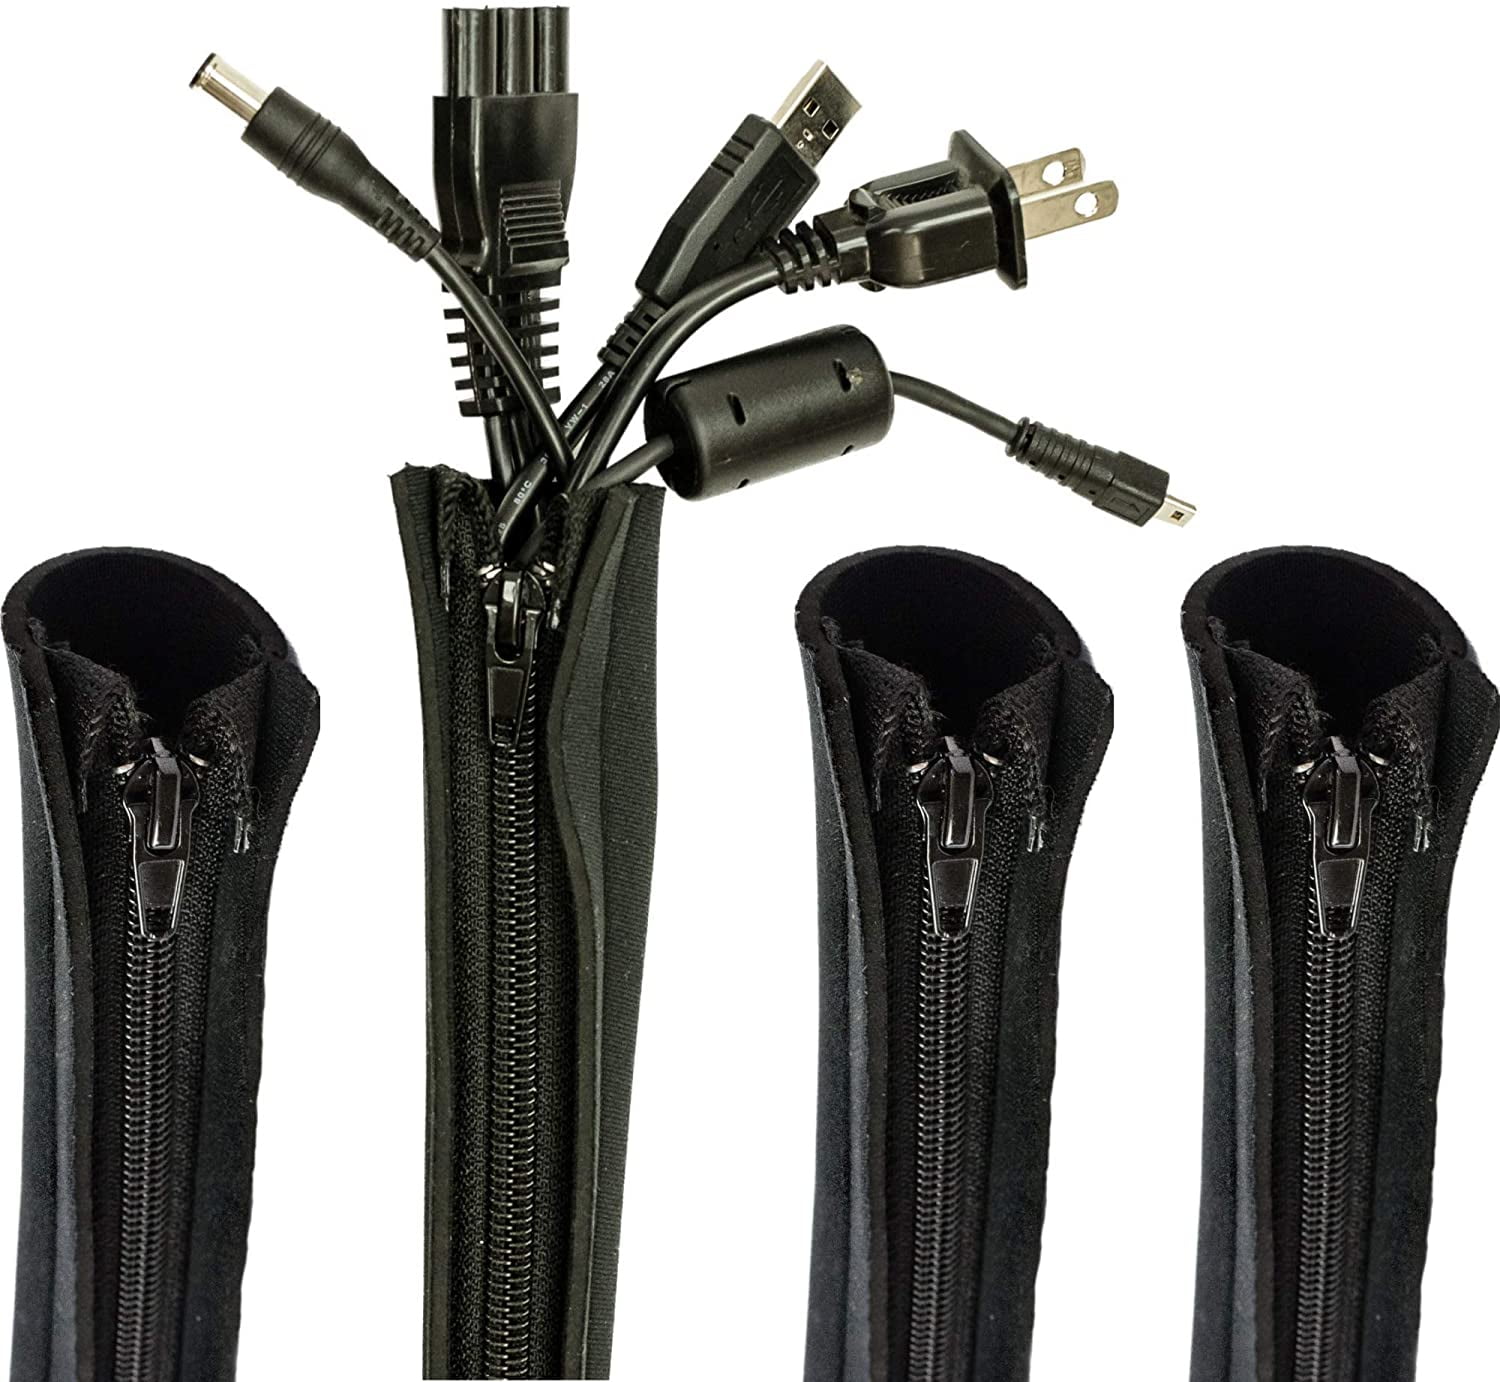 Cable Management Sleeve, 4 Pack, 20 Inch Cord Organizer System with Zipper  for TV Computer Office Home Entertainment, Flexible Cable Sleeve Wrap Cover